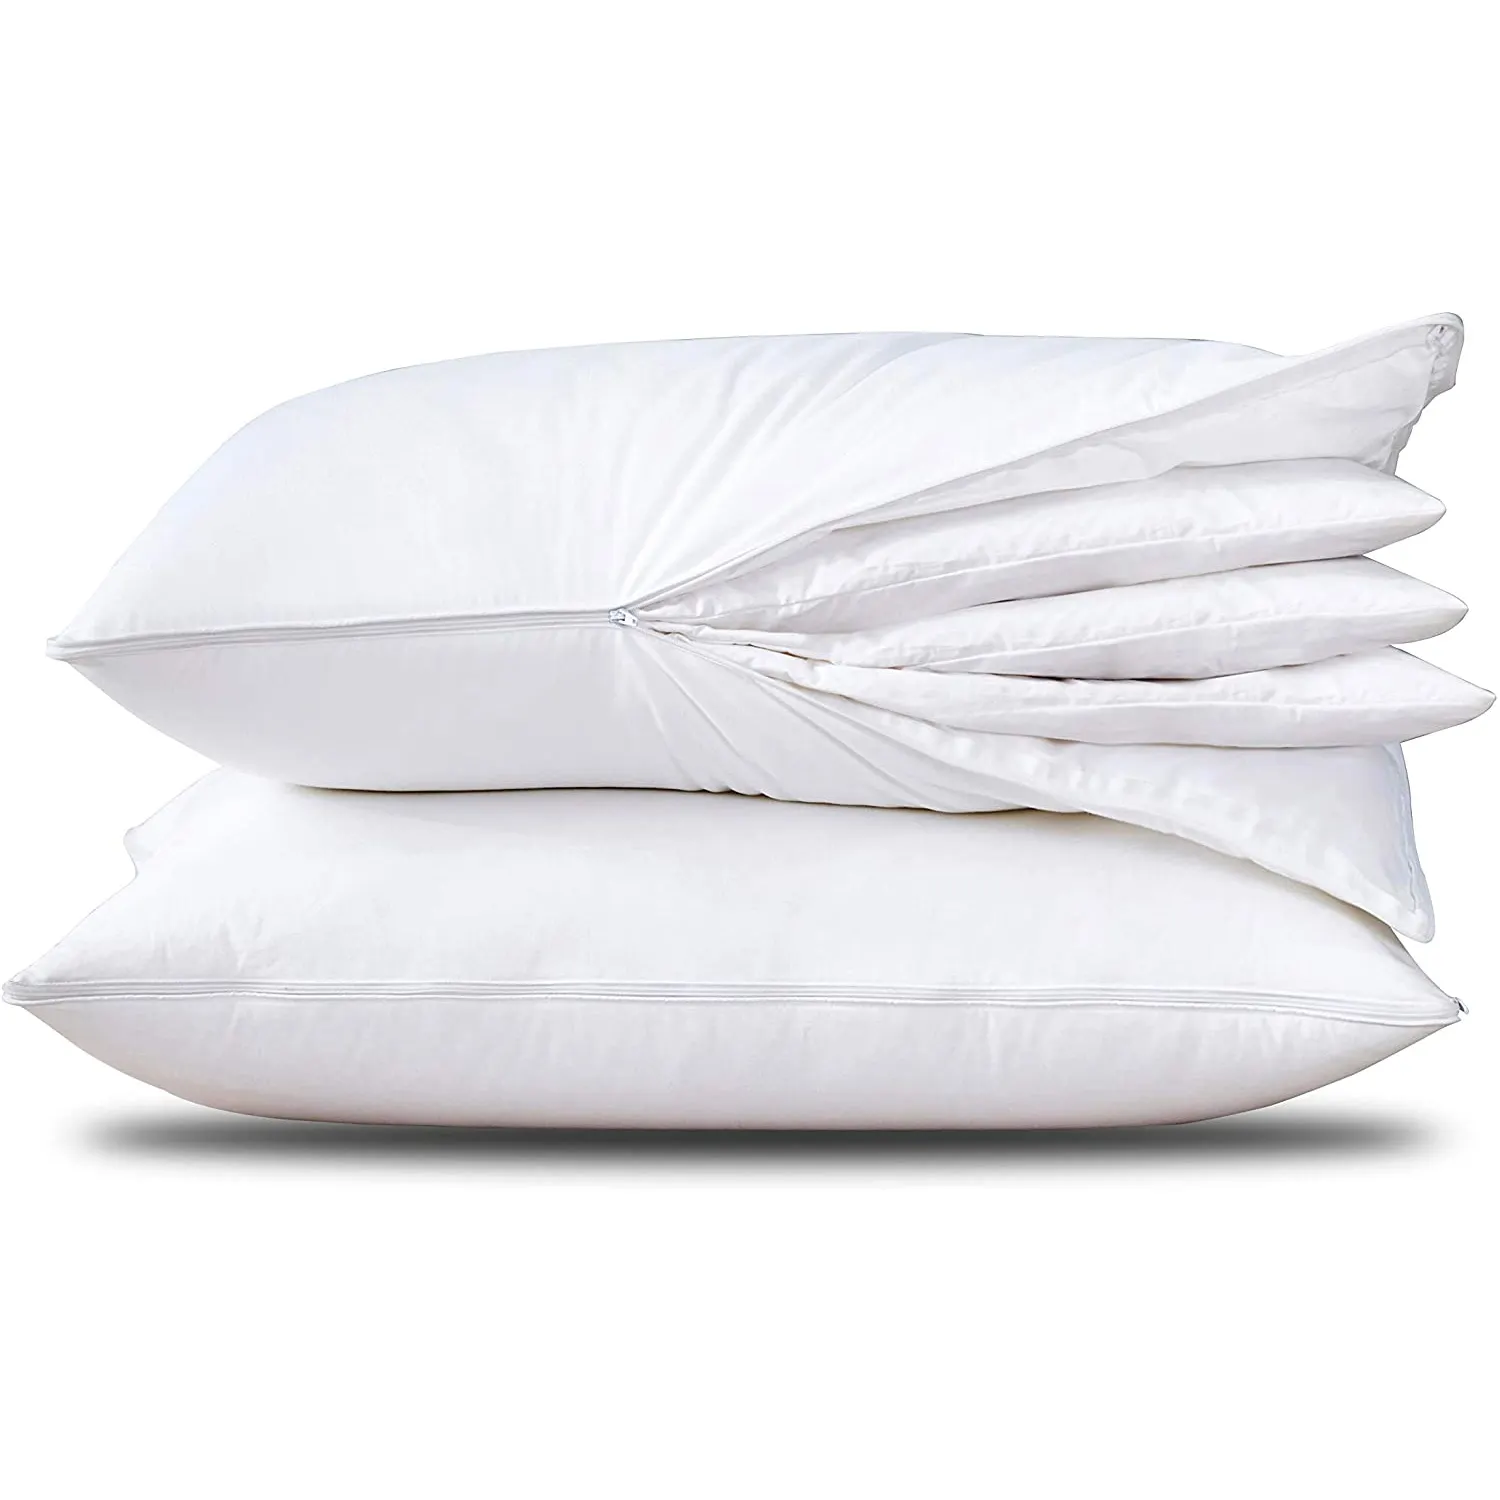 Pillow Insert luxury premium white 5 star hotel used neck down-proof fabric 3 layer duck home feather down filled pillows